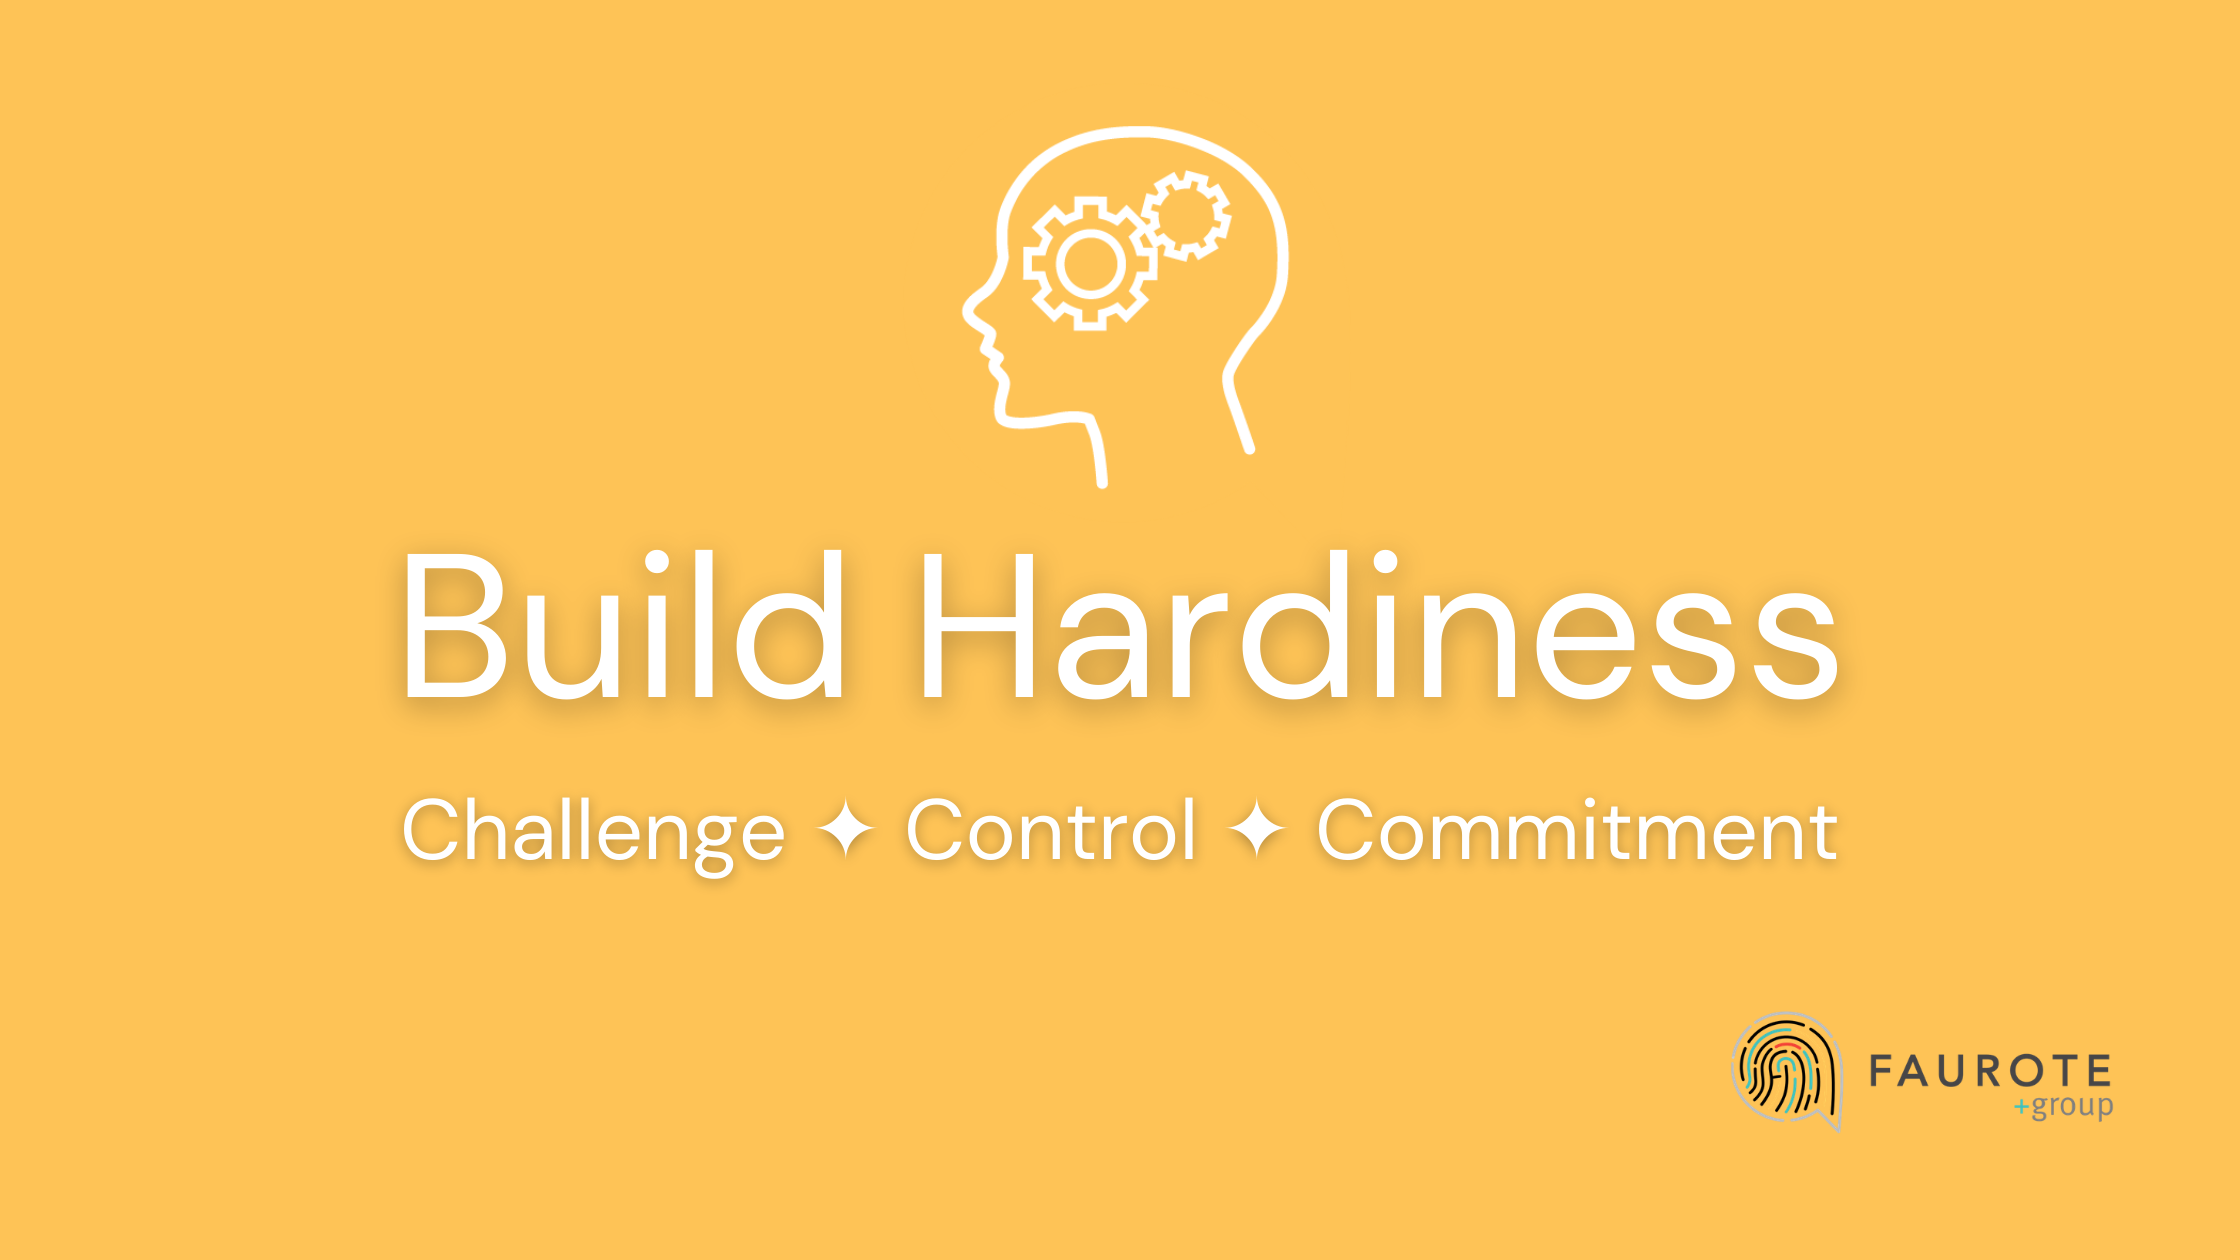 Text: Build Hardiness: Challenge - Control - Commitment